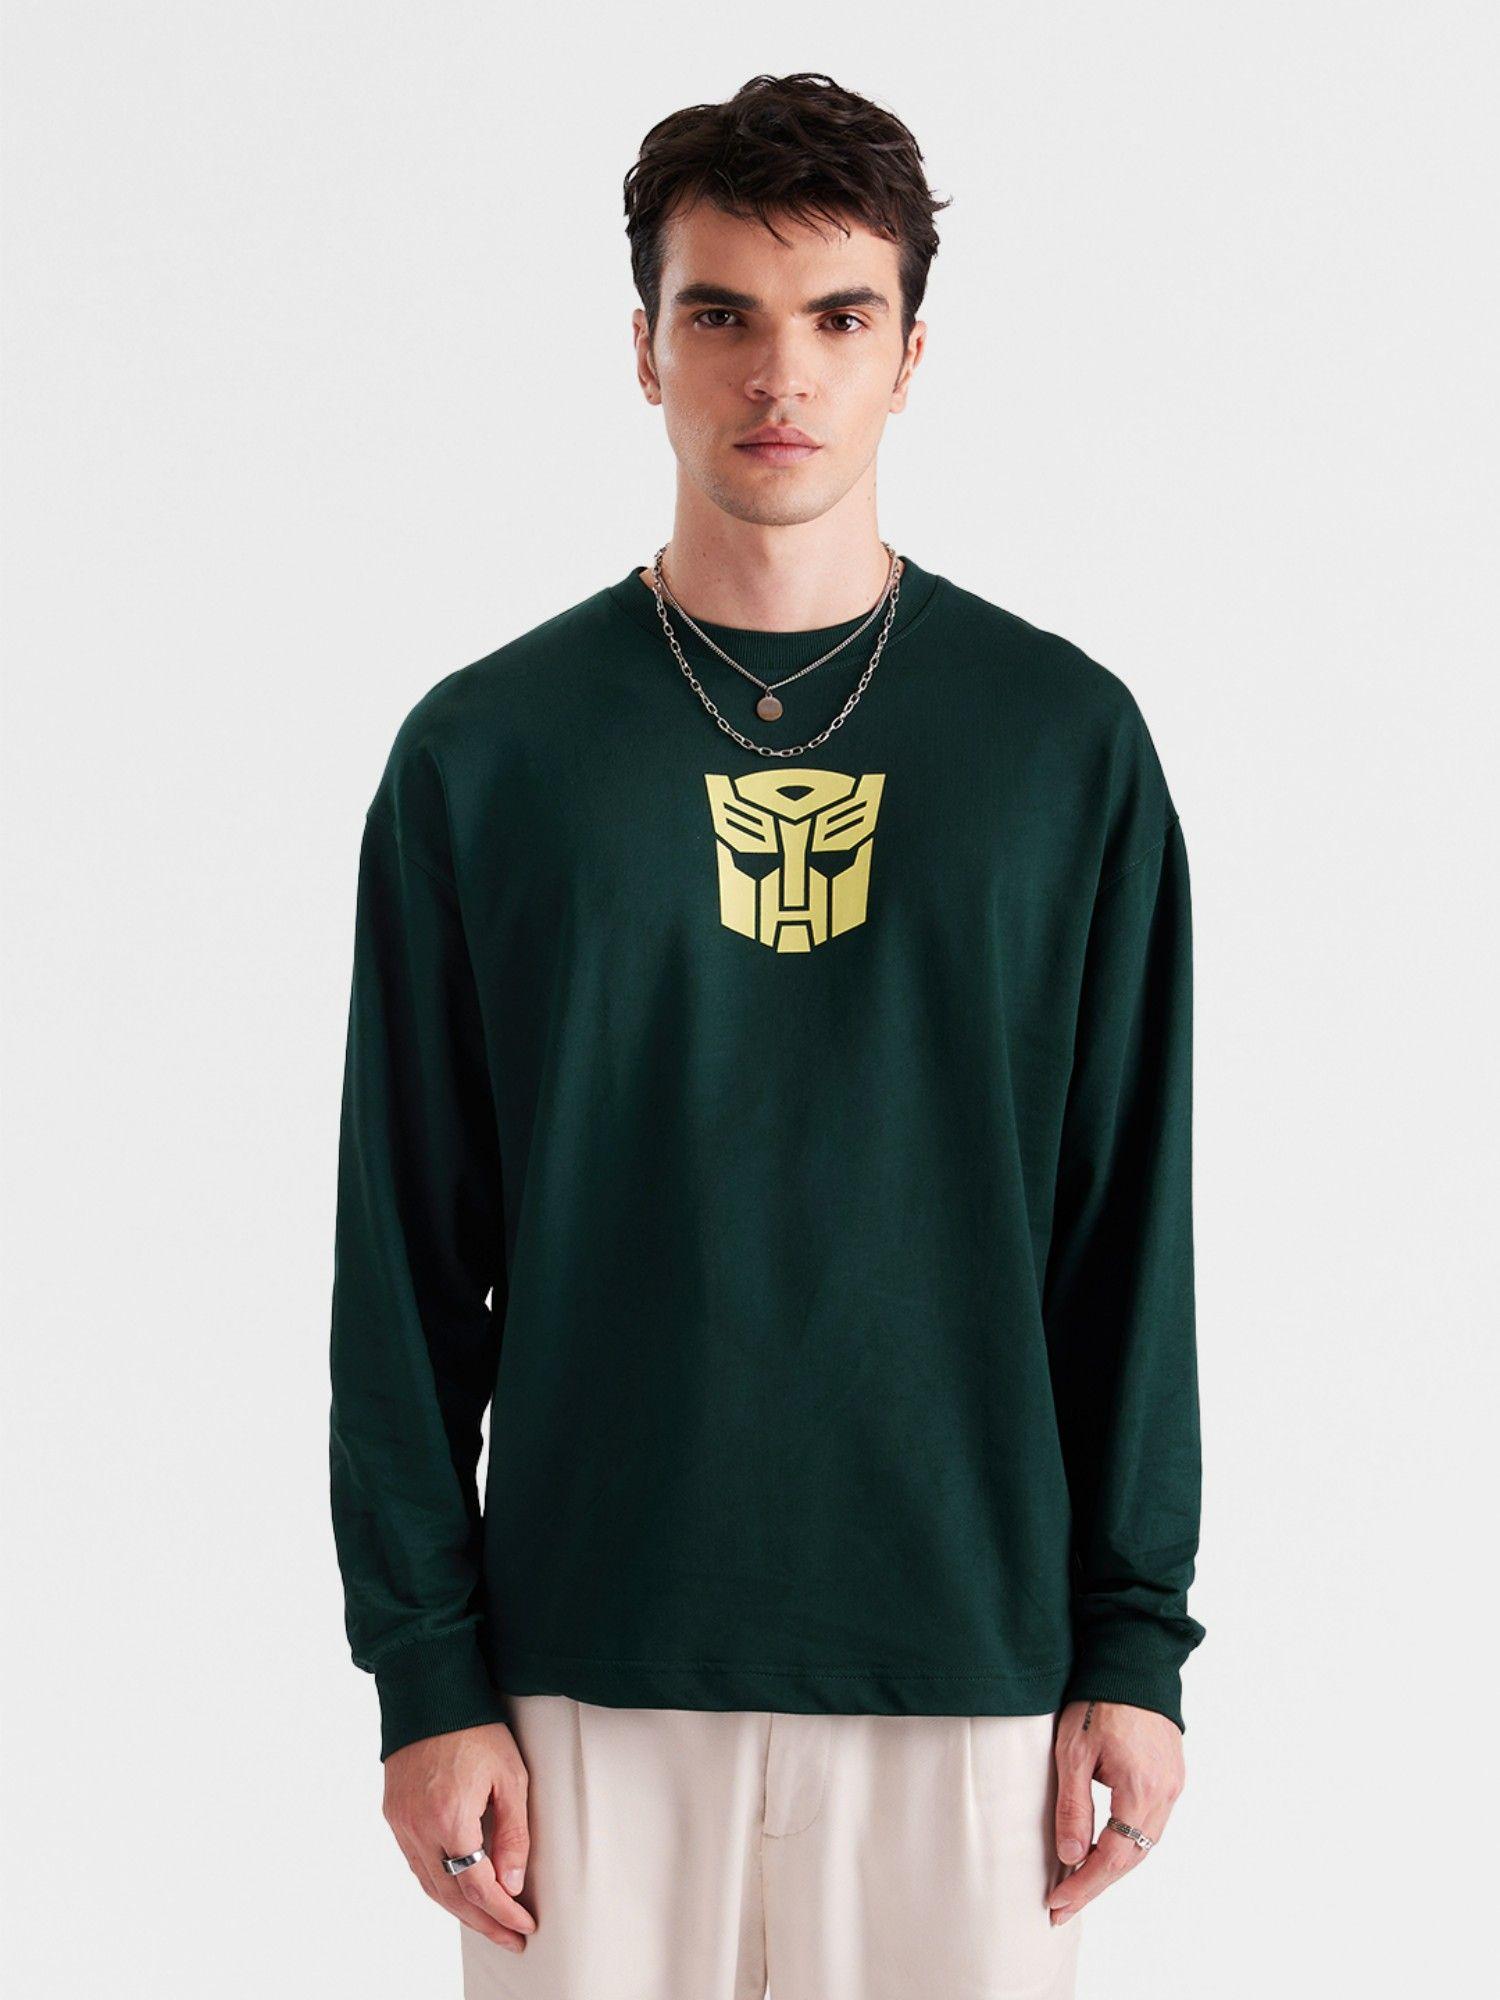 transformers: bumblebee oversized full sleeve t-shirts for mens